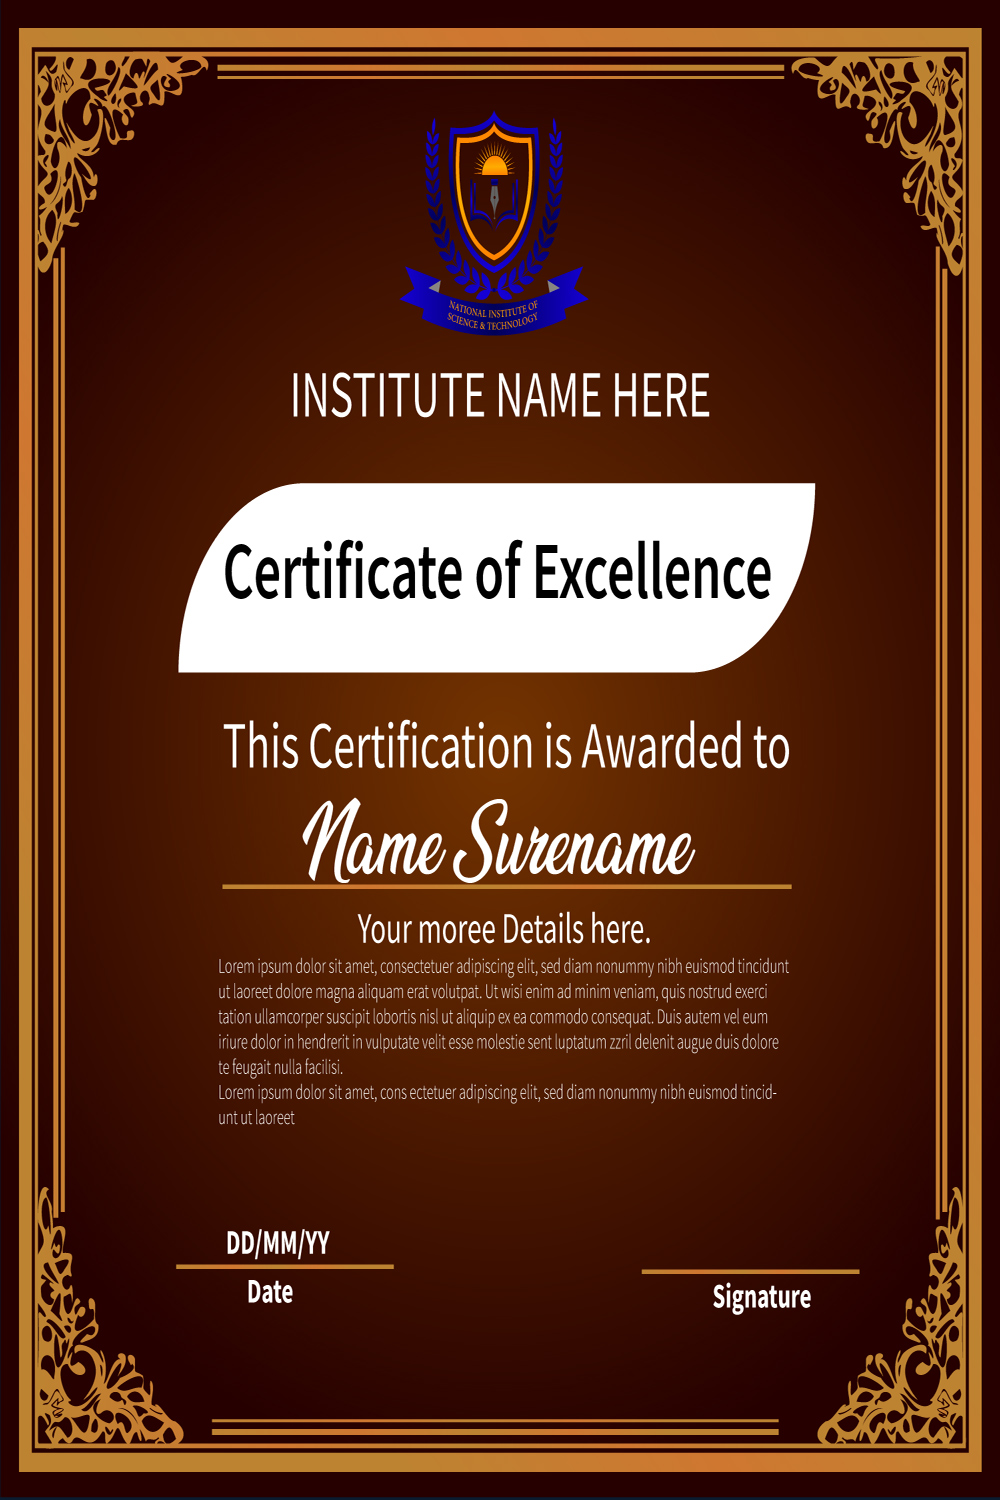 School, Academy or any educational institute Certificate template design pinterest preview image.